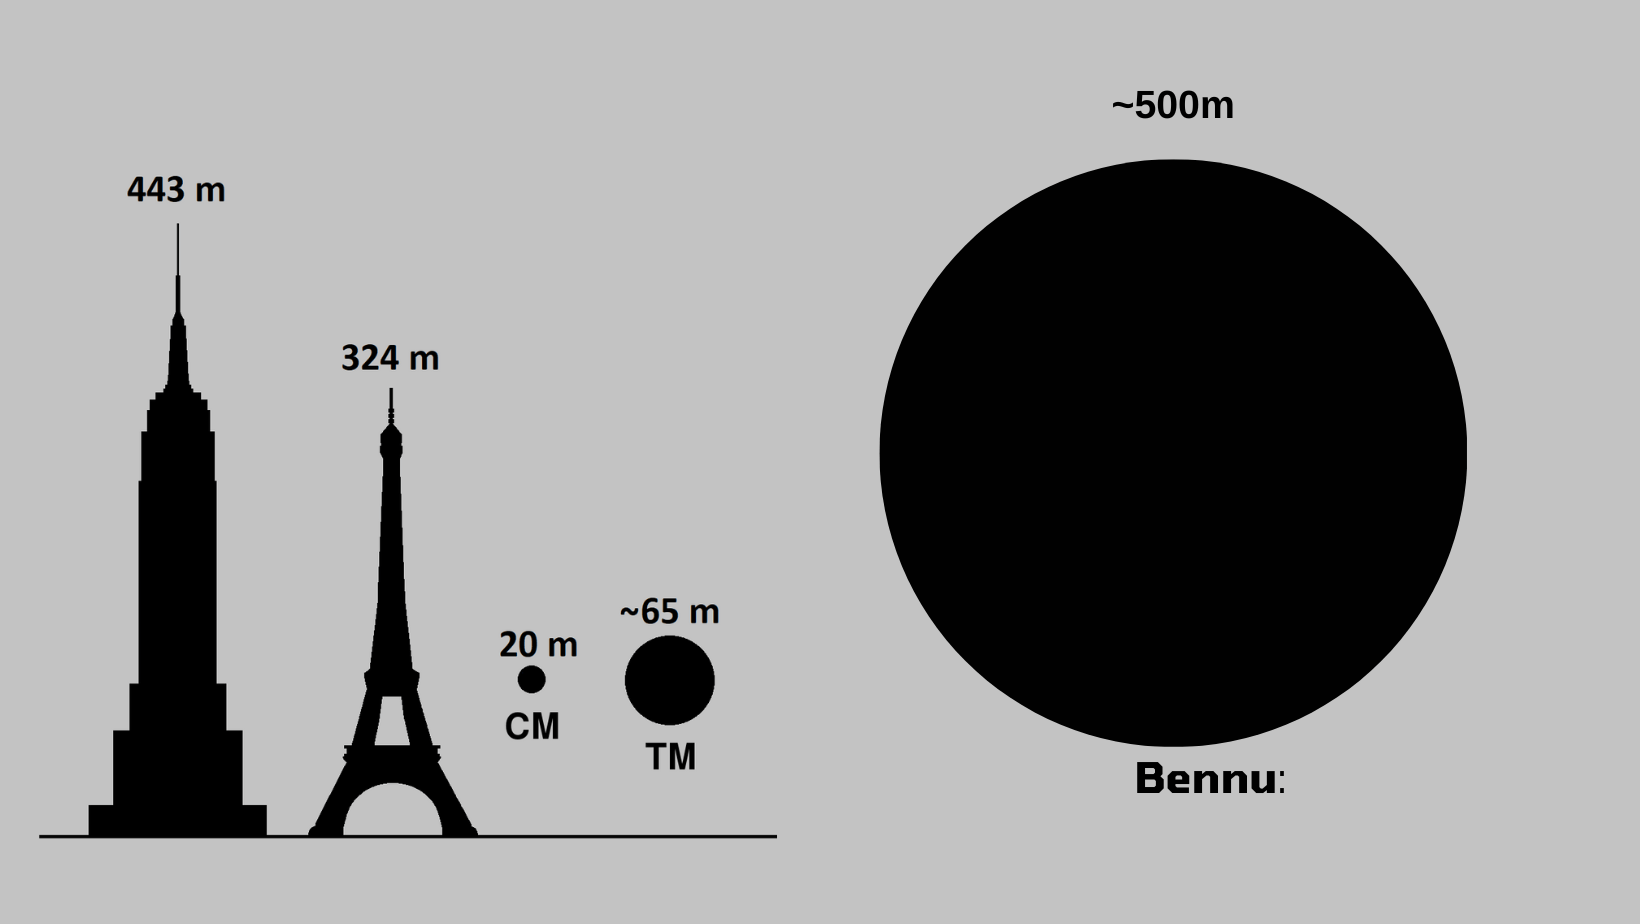 Empire state building and Eiffel Tower in comparison with asteroid Bennu